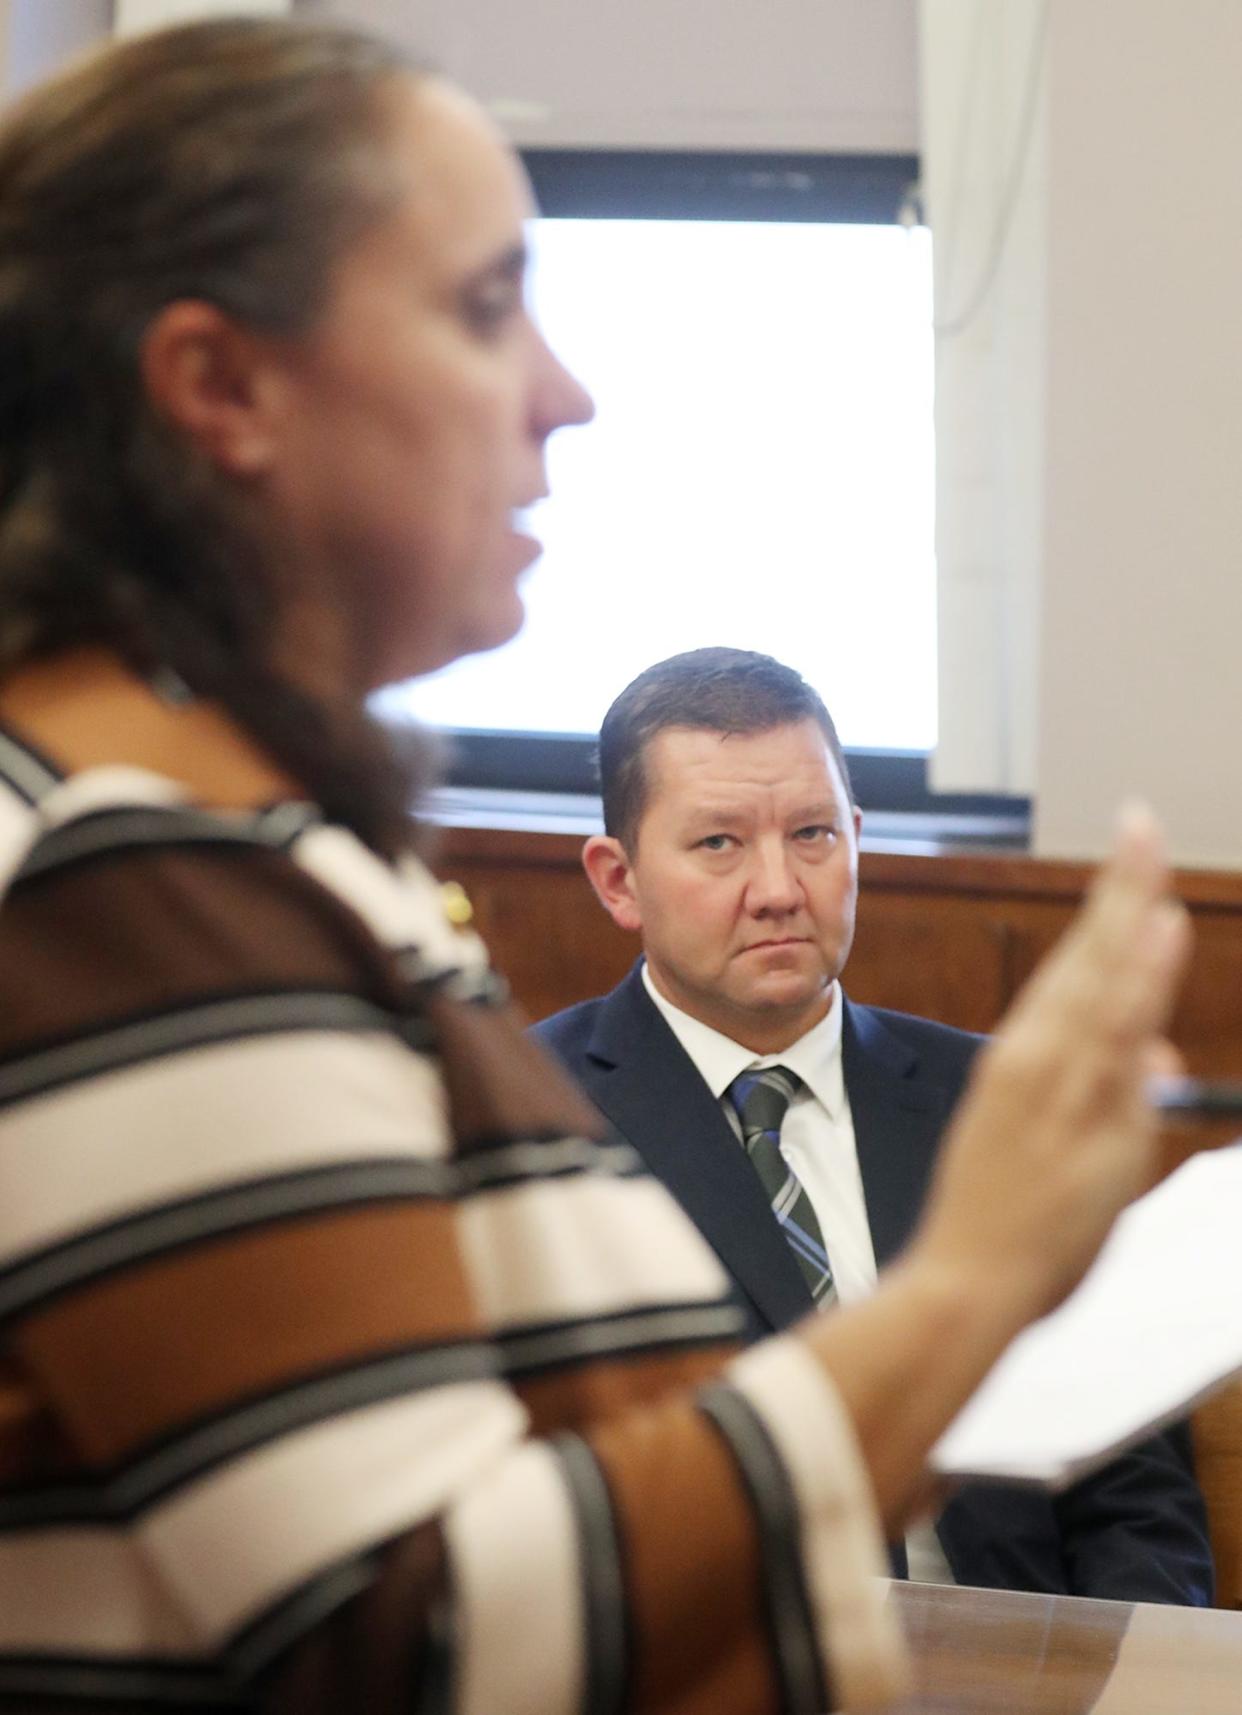 Assistant city prosecutor Jennifer Roberts gives her opening statement as former state Rep. Bob Young listens during his bench trial in Barberton Municipal Court on Tuesday.